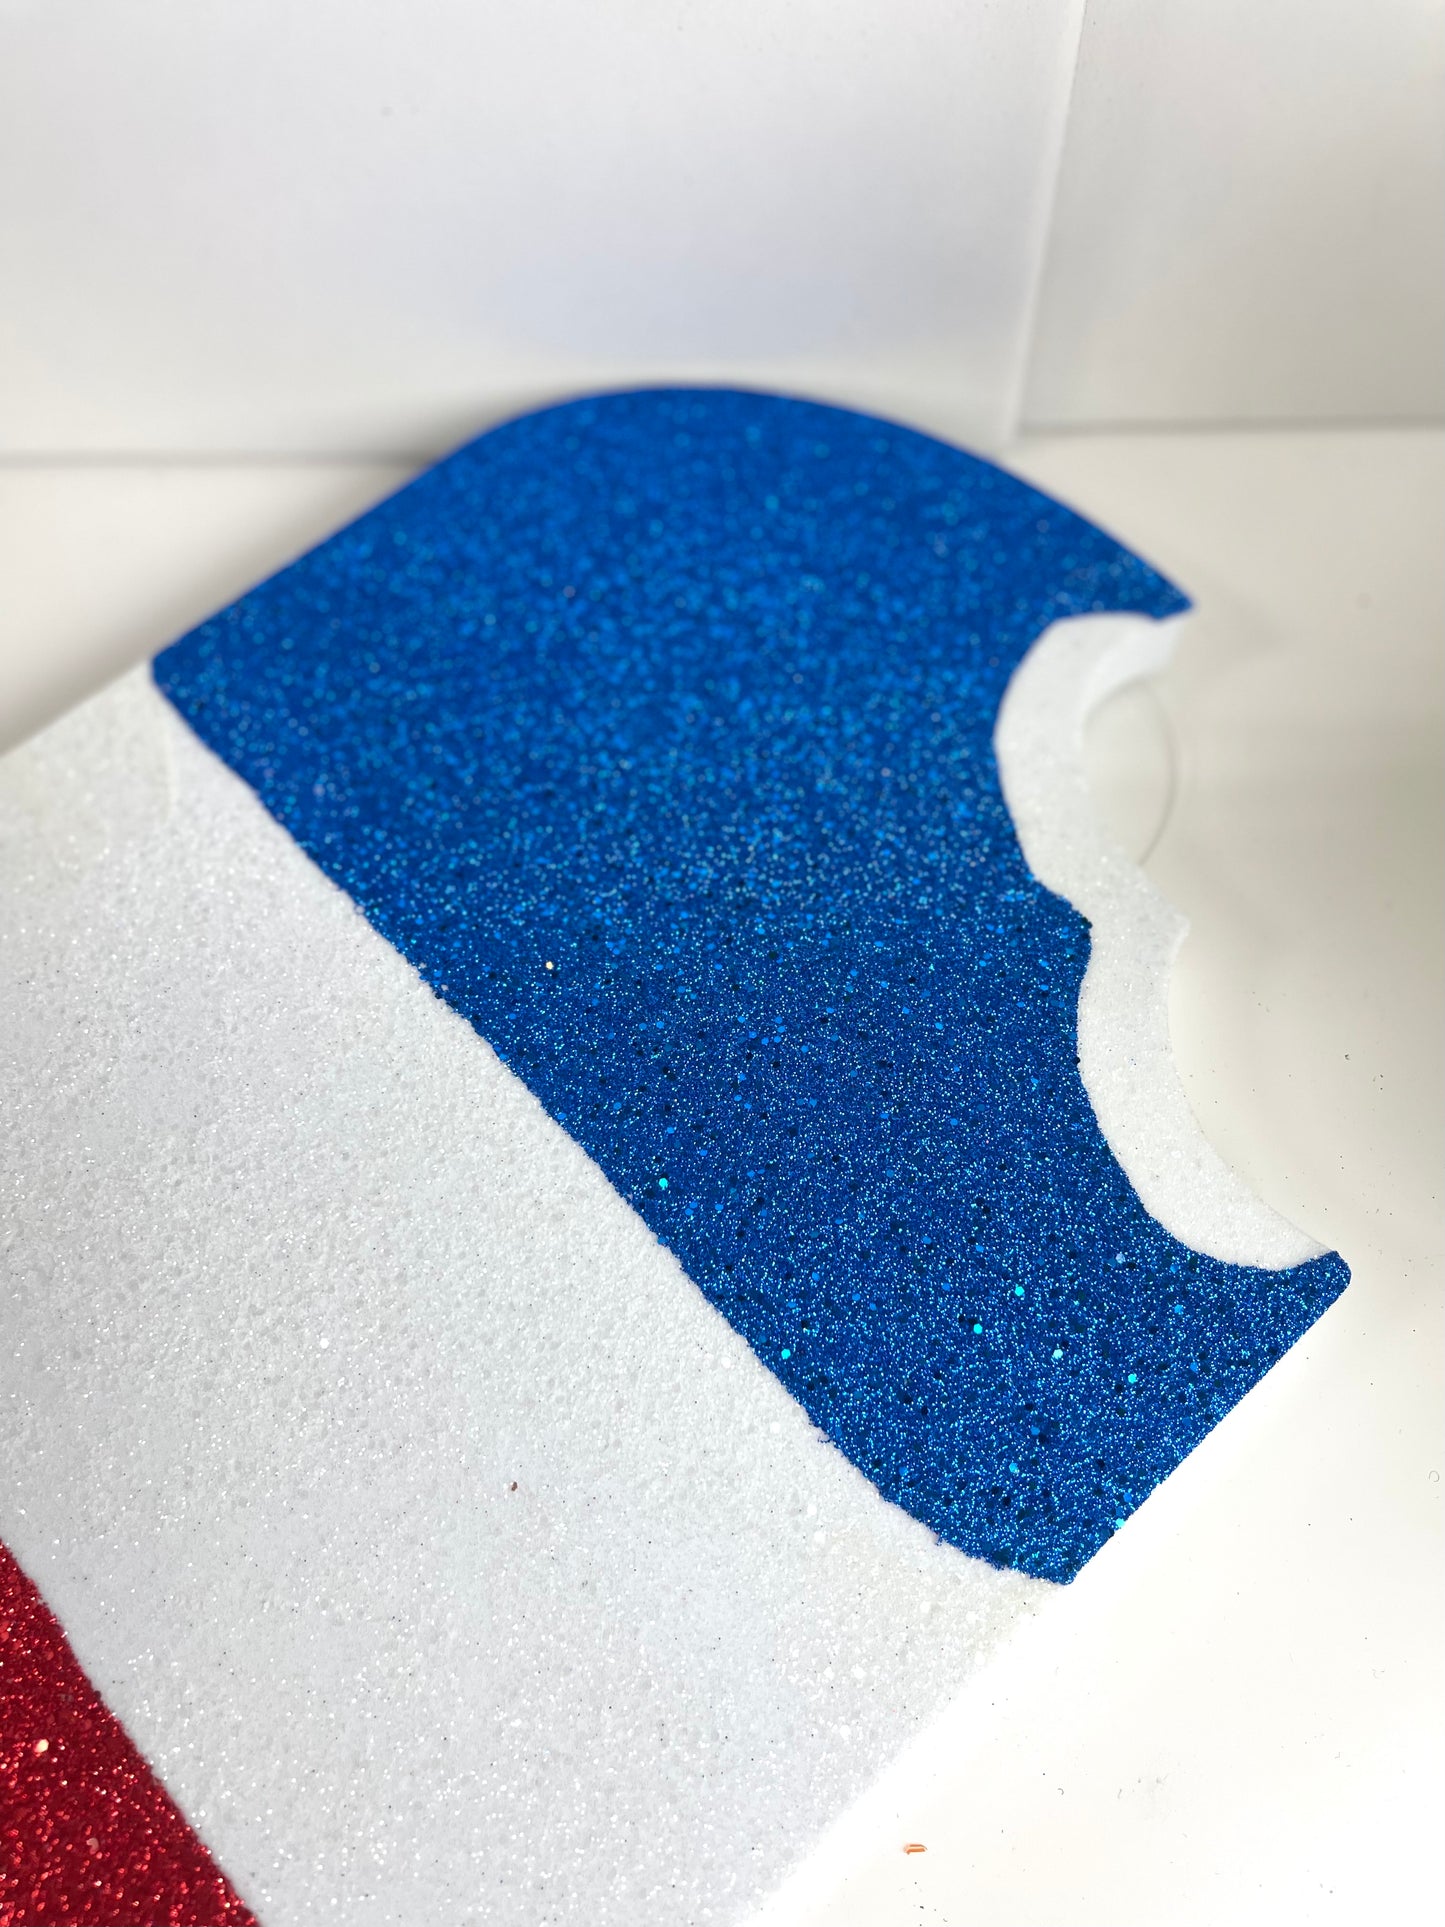 Red White And Blue Glitter Patriotic Popsicle